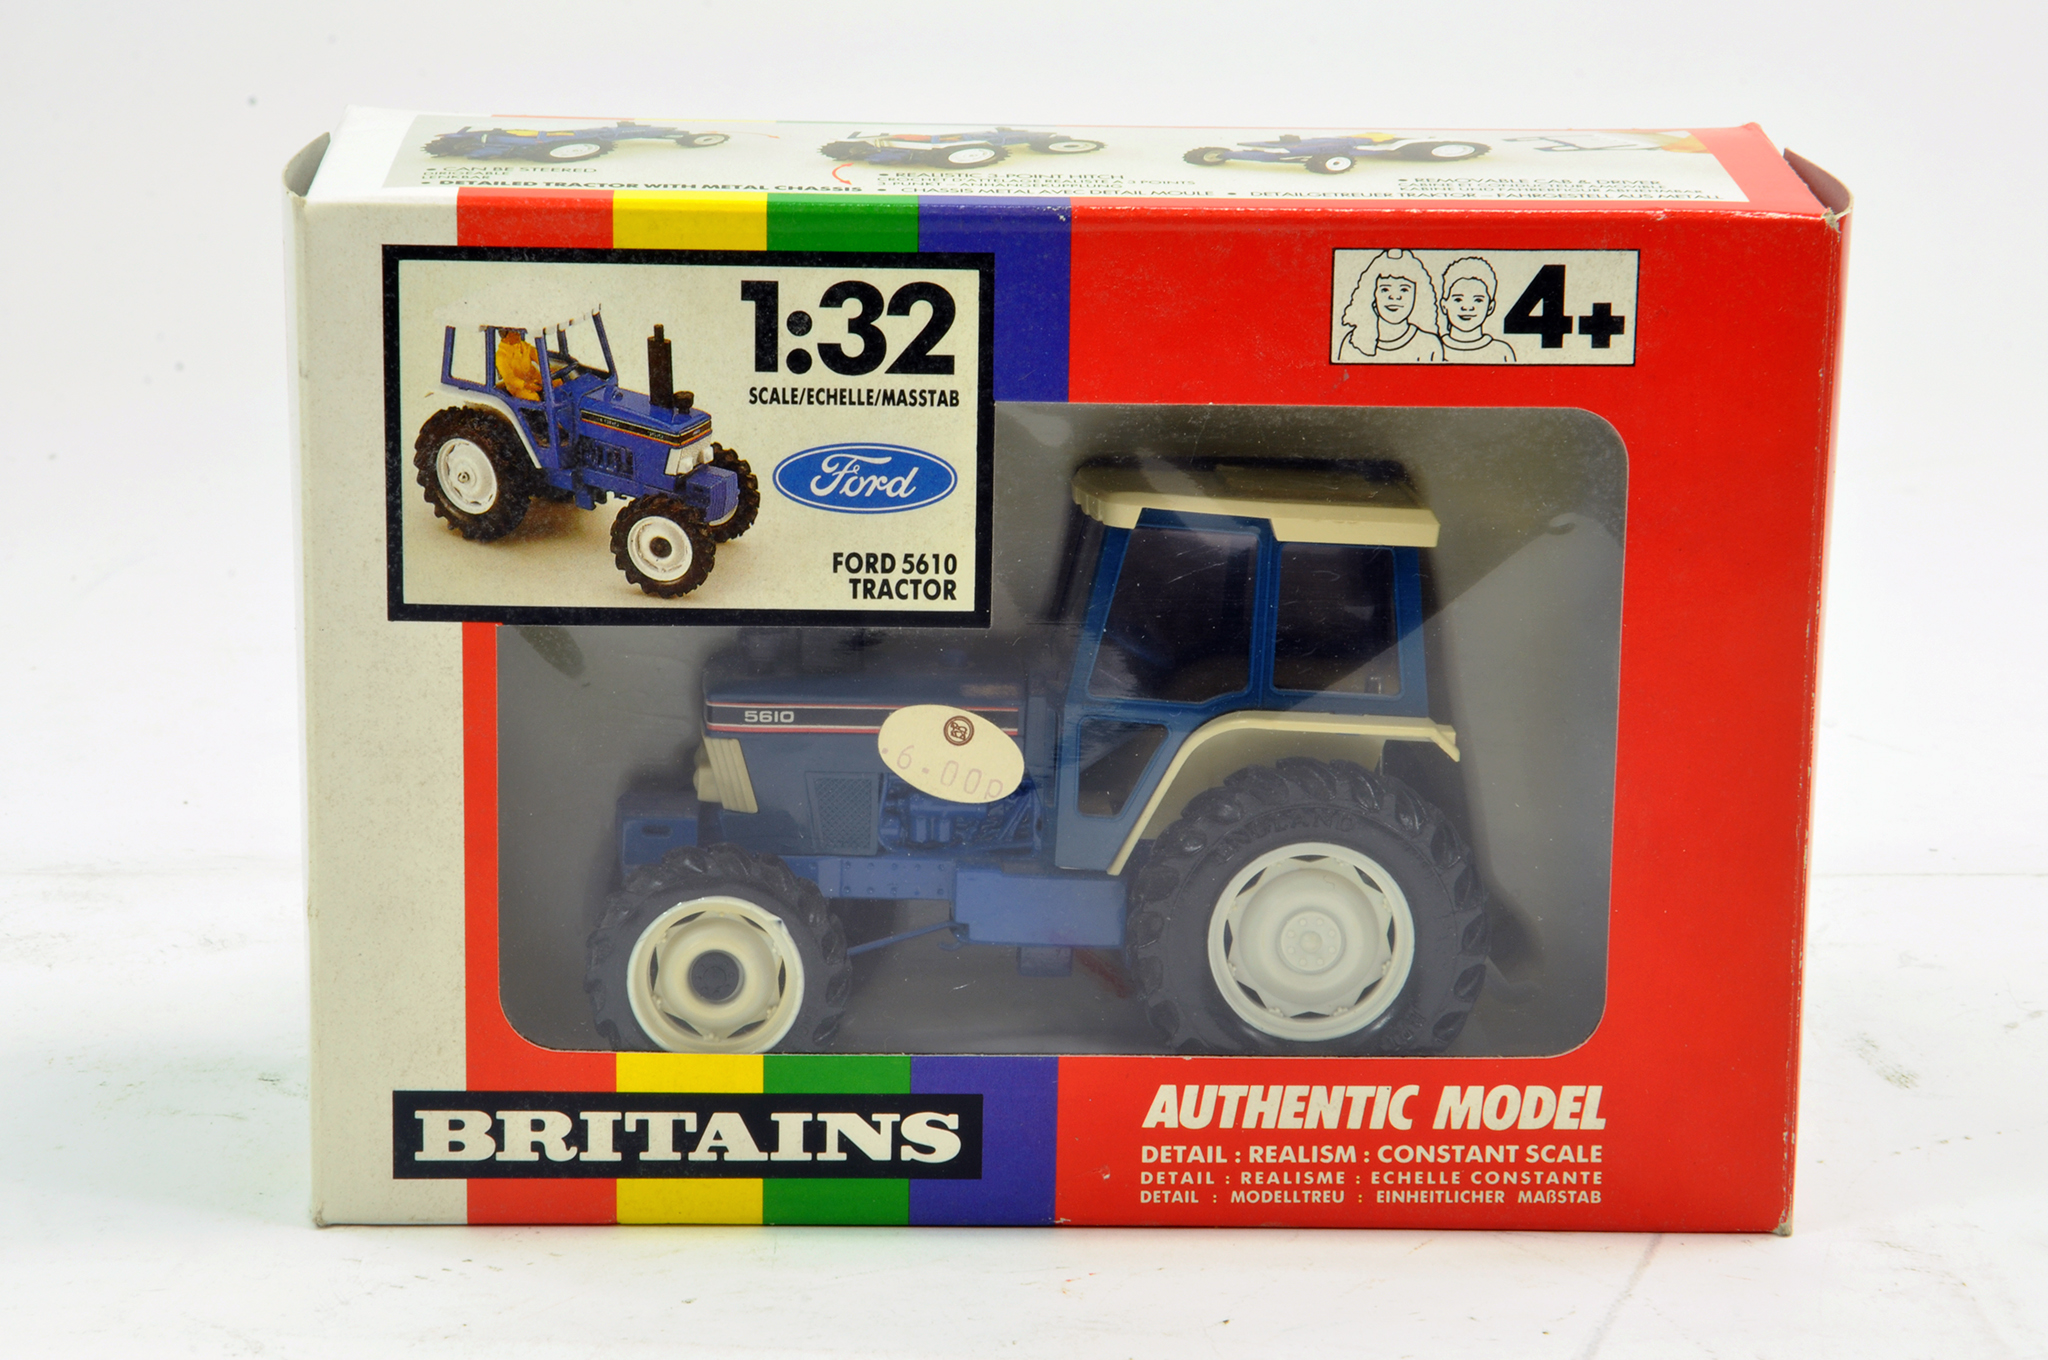 Britains 1/32 Farm Issue comprising Ford 5610 Tractor. Excellent to Near Mint in Box.